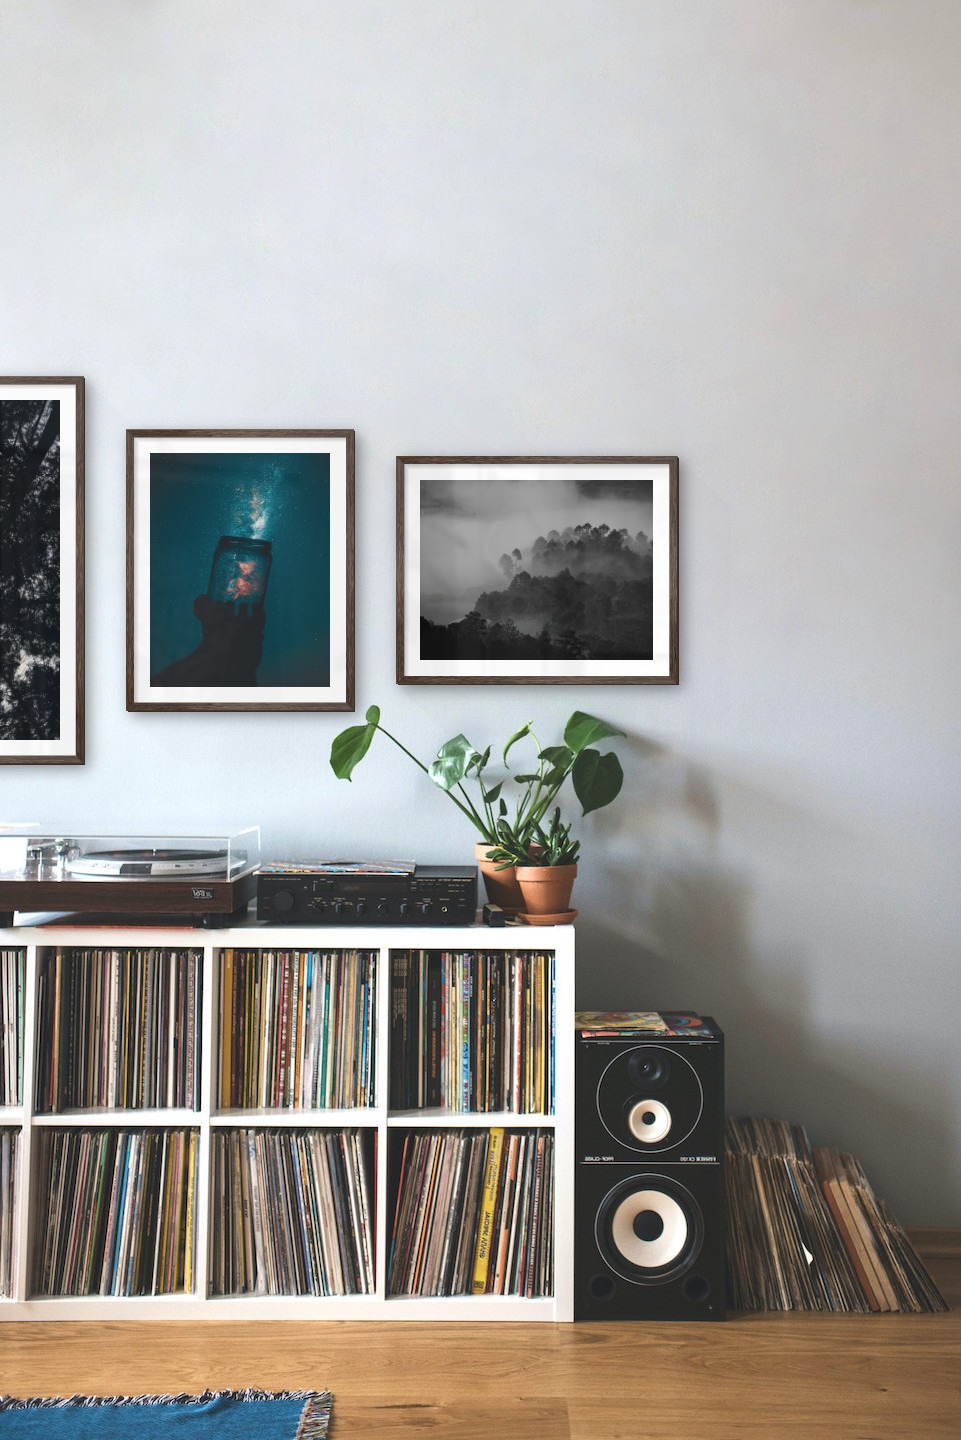 Gallery wall with picture frames in dark wood in sizes 50x70 and 40x50 with prints "Wooden tops and birds", "Jar in front of space" and "Foggy wooden tops"